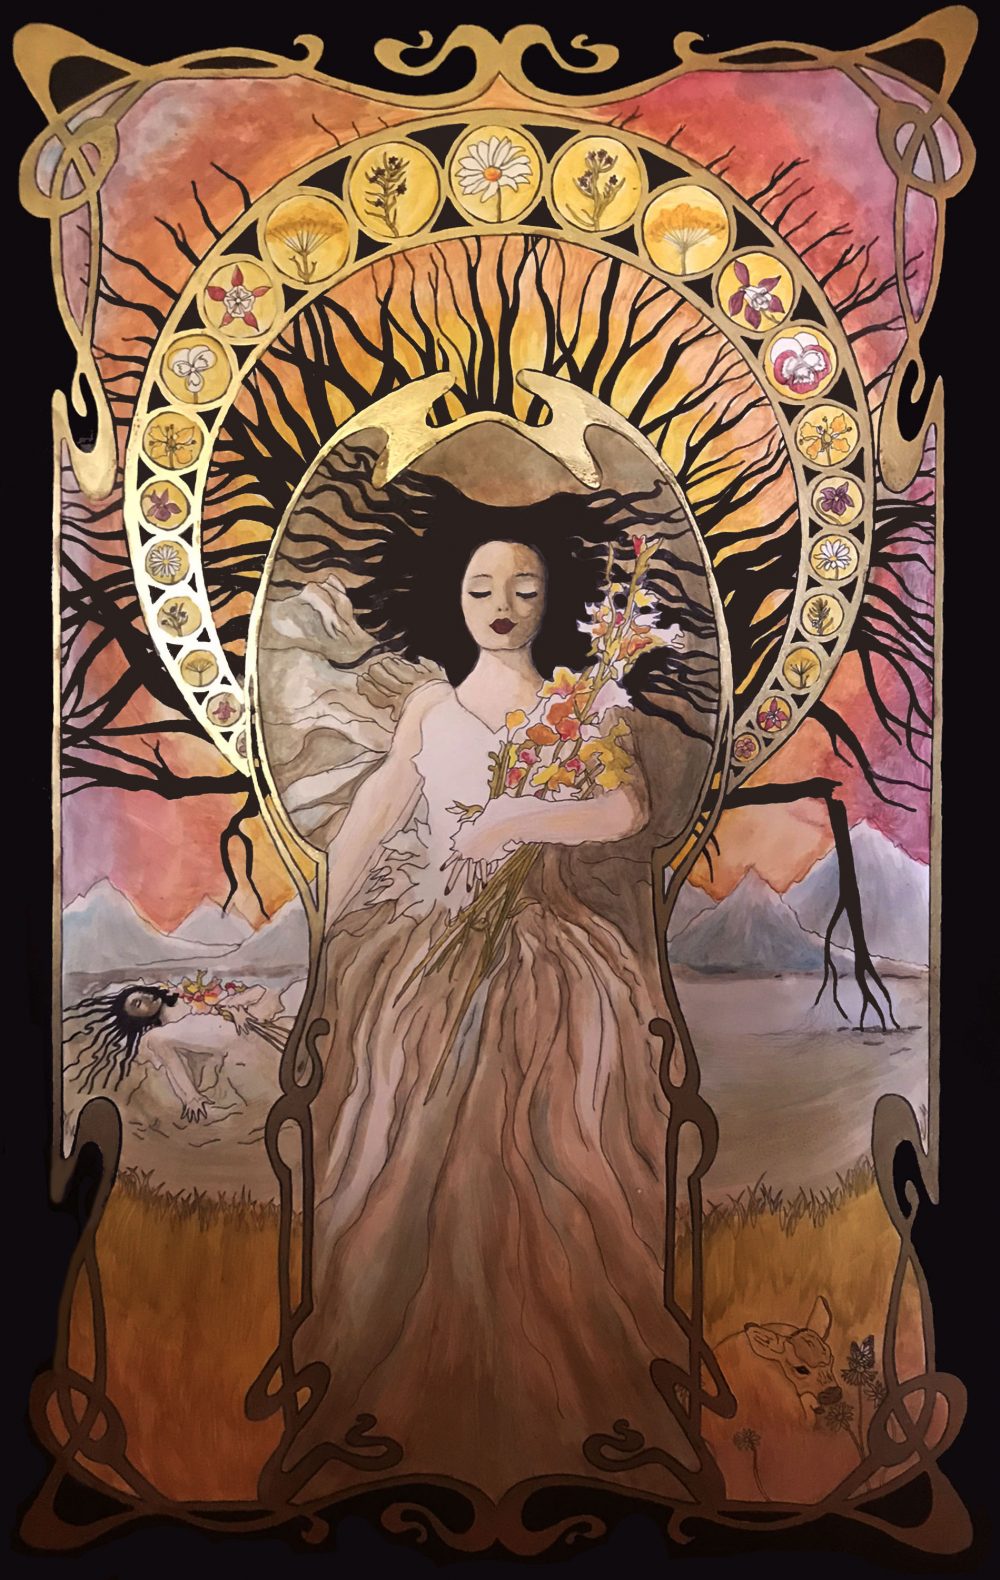 Ophelia is large in the center of the image and is floating in water, wearing a billowing white dress. This image includes art nouveau style framing around Ophelia and the background. In the background is a lake with a large willow tree with a broken branch. The branches of the willow tree are placed so they appear as a continuation of Ophelia's hair that is radiating out around her head. Around her torso is also a round art nouveau frame that includes illustrations of all of the flowers that she gave to others. The colors are bright and warm, and there is a sunset in the sky in the background. A small deer is also laying in the grass in the bottom right foreground.